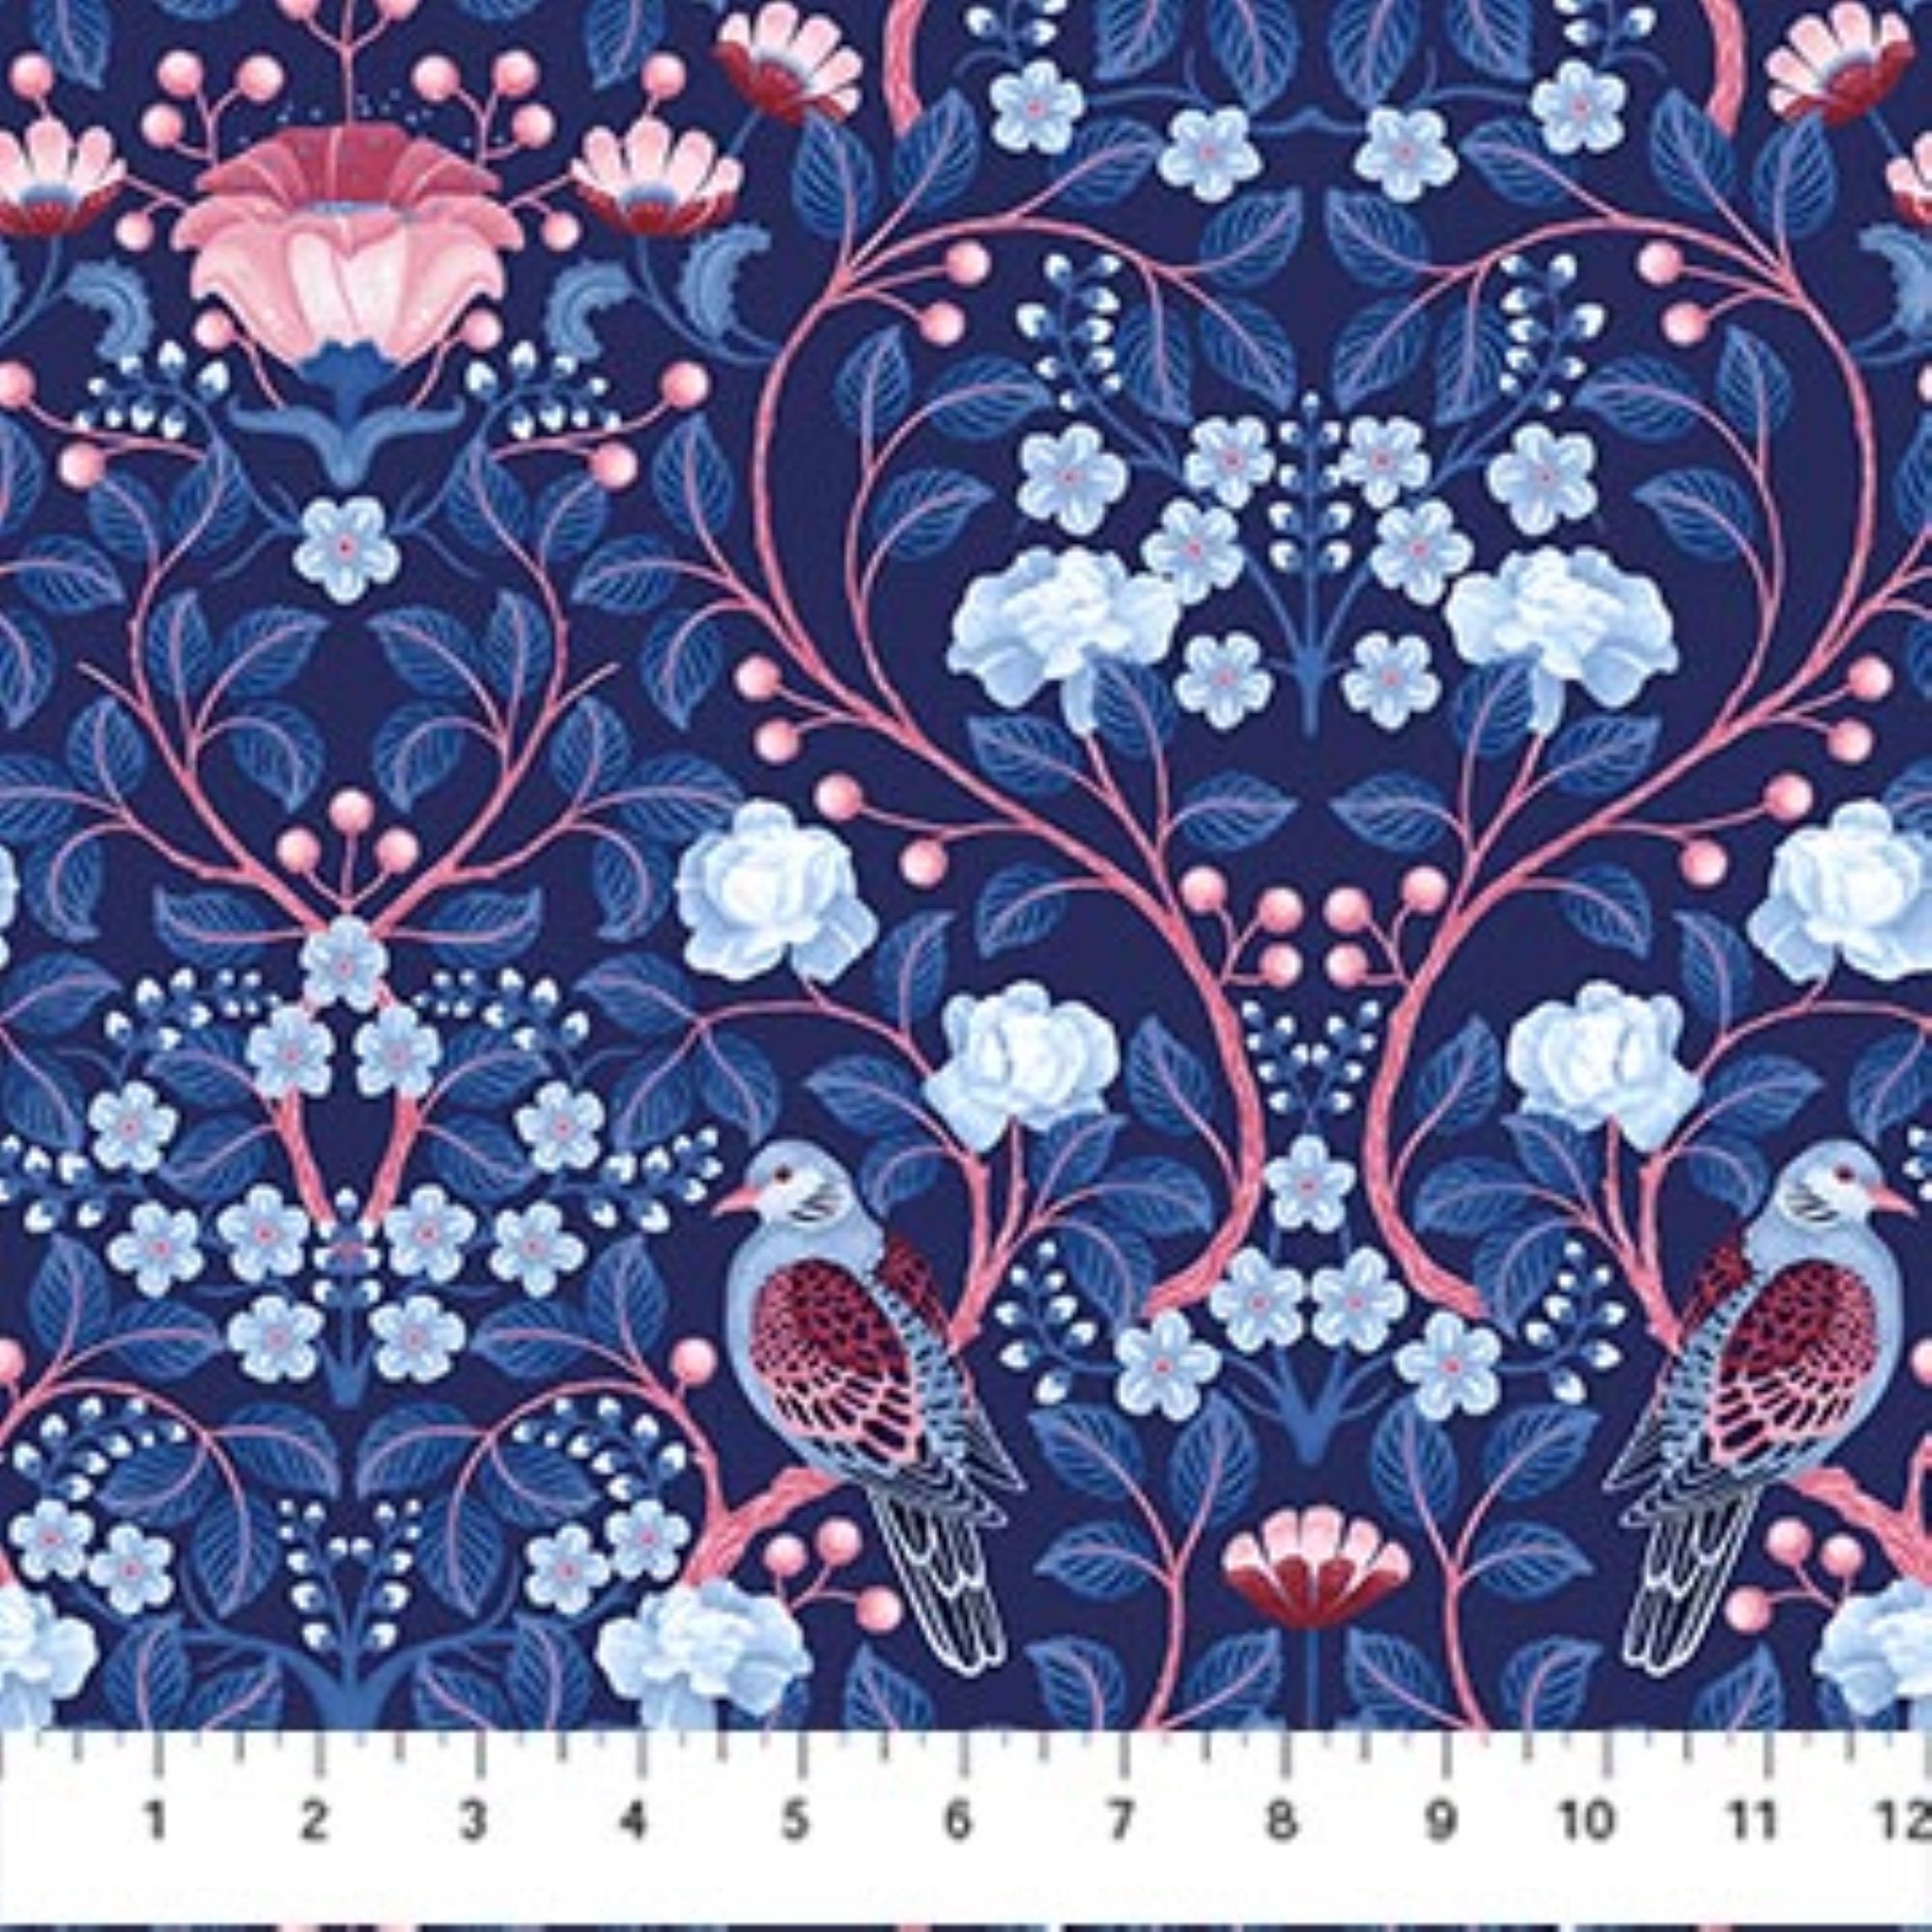 Delightful Tapestry C10253 Blue - Riley Blake Designs - Floral Flowers  Tone-on-tone Roses - Quilting Cotton Fabric